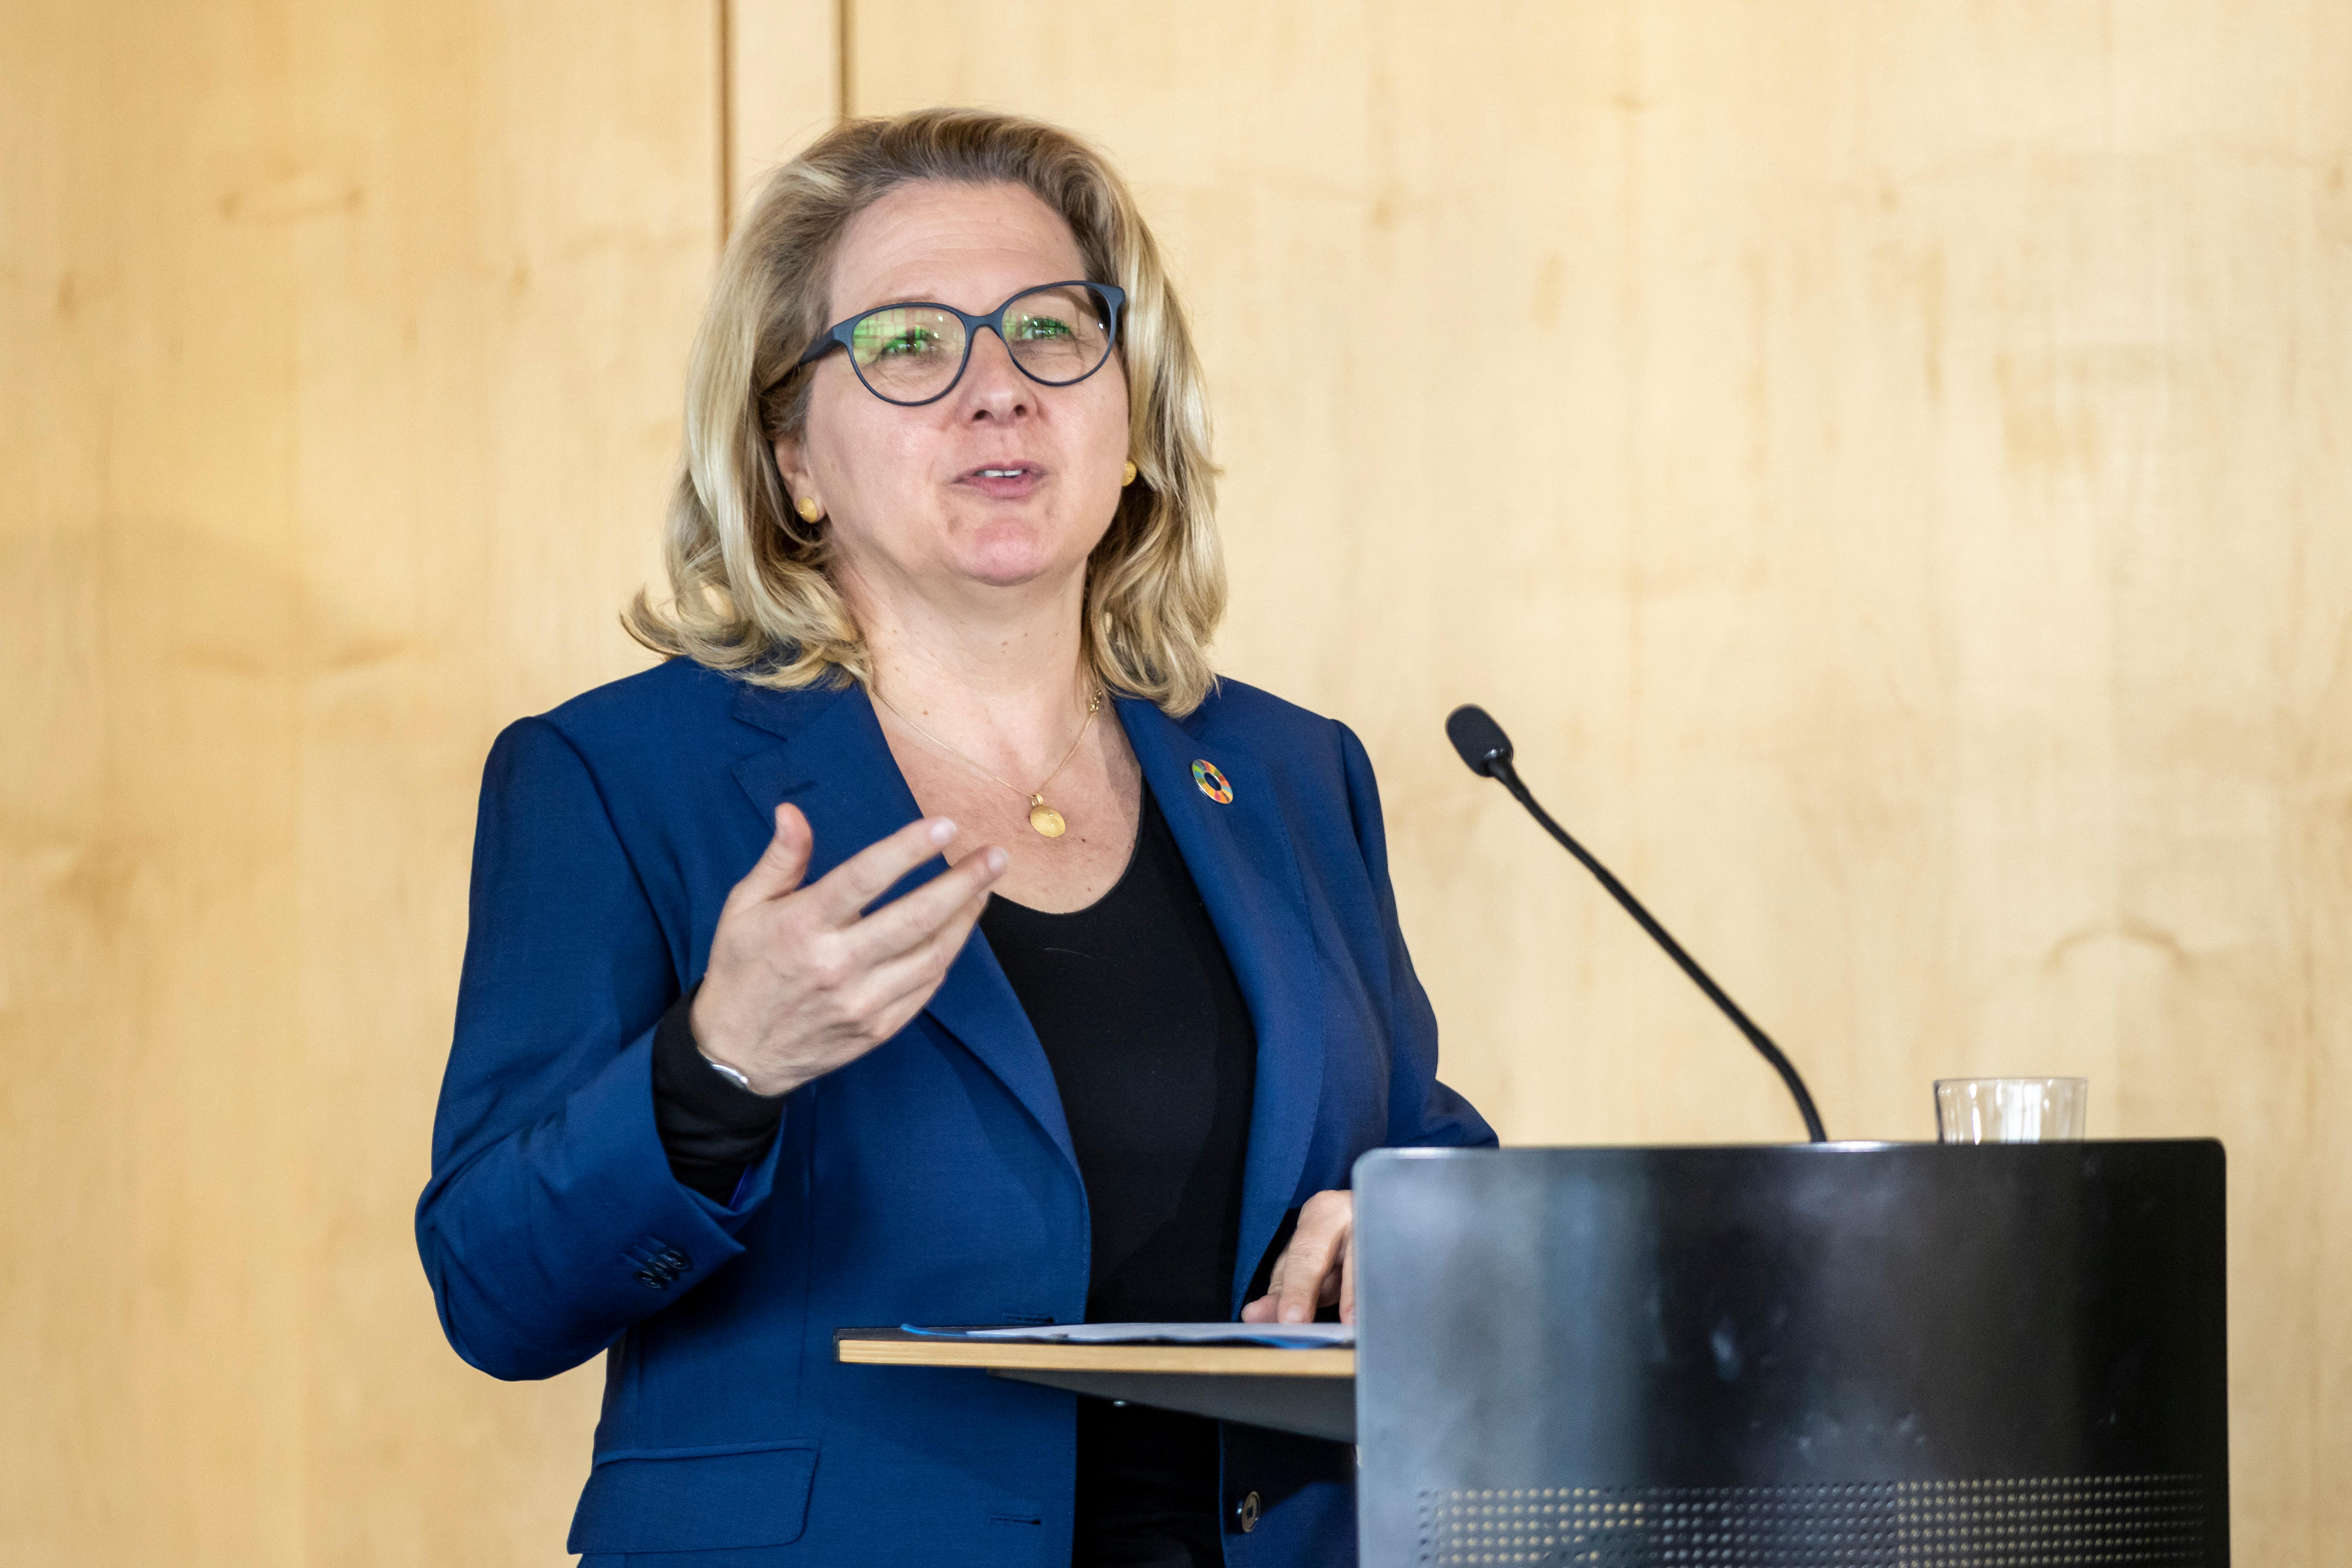 Development Minister Svenja Schulze during her speech at the dialogue event "More than just a 'women's issue' - Sexual and reproductive health and rights as key to feminist development policy" at the BMZ in Berlin